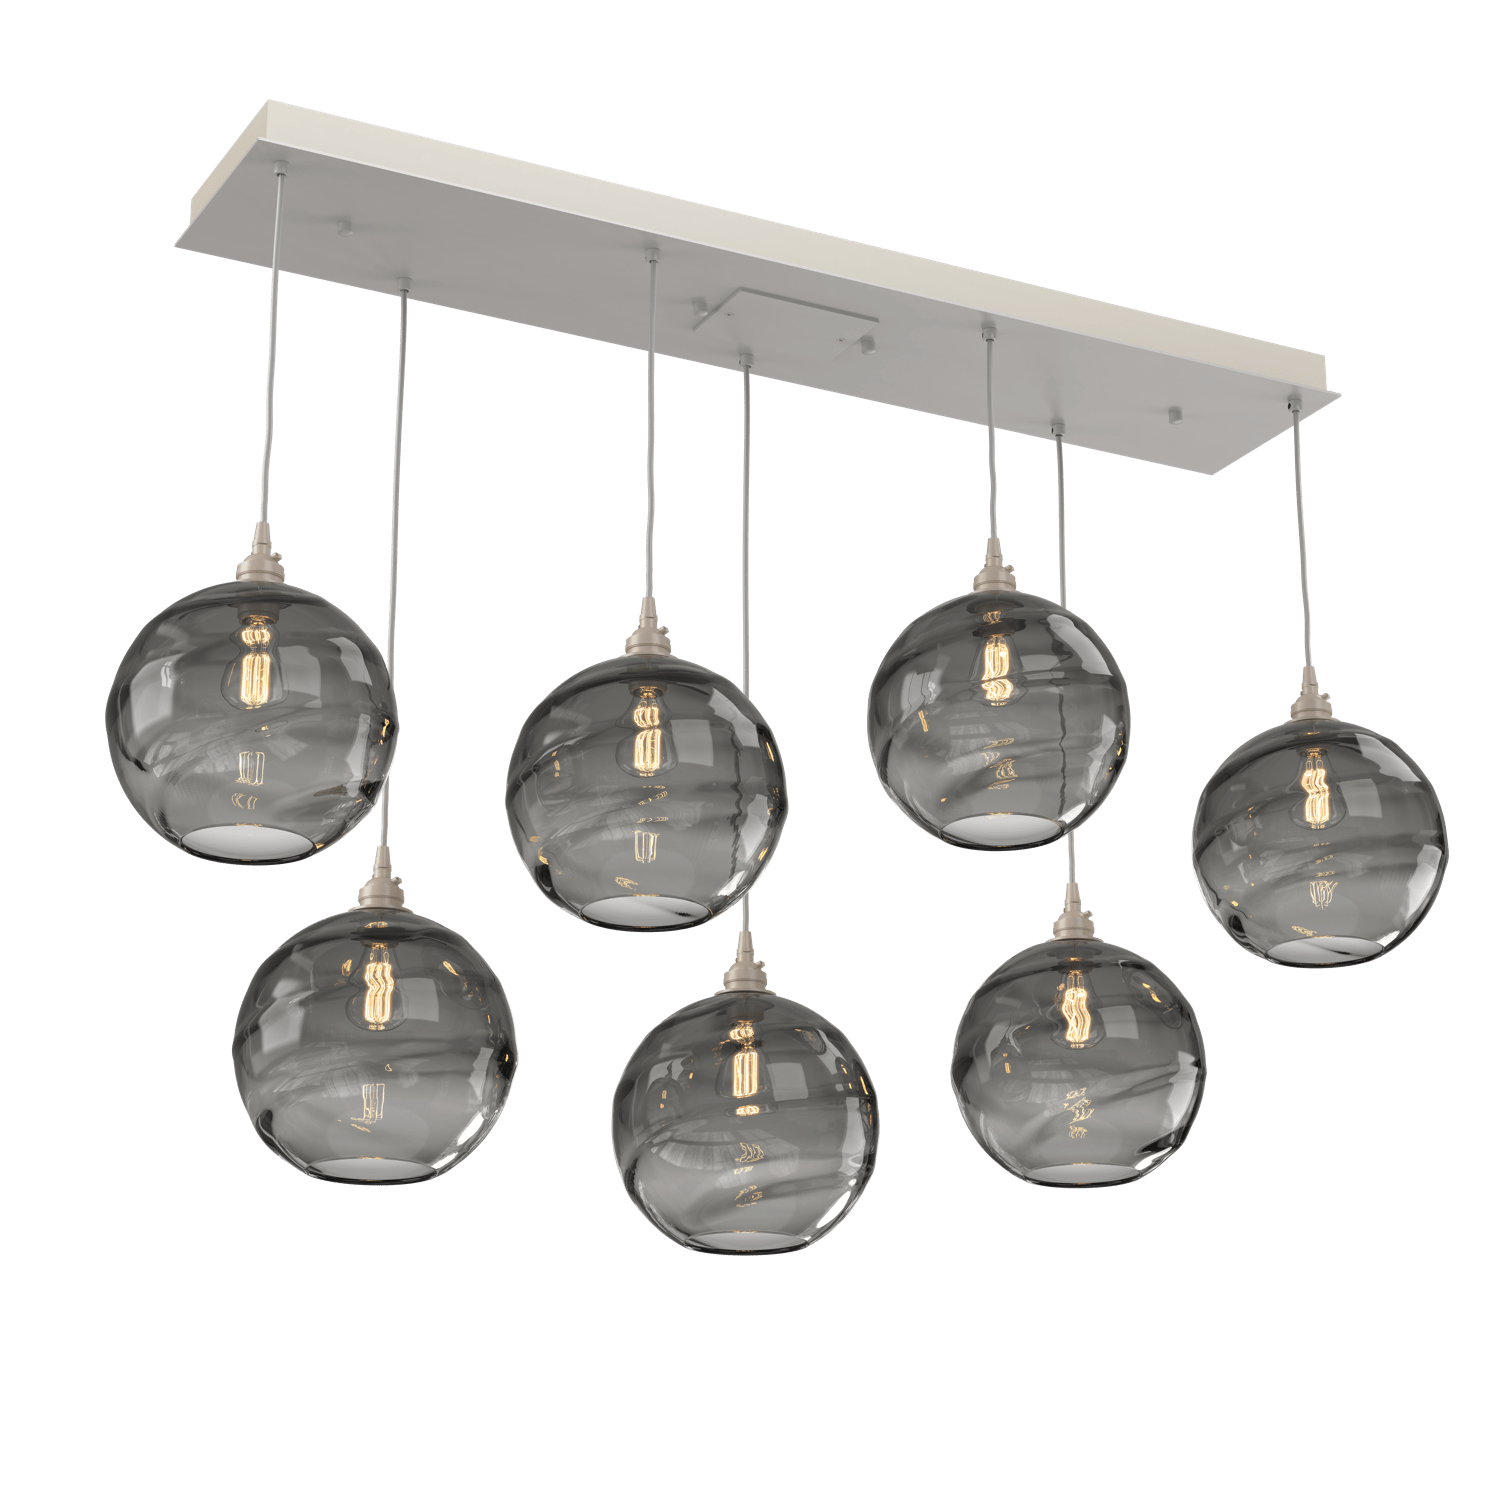 PLB0047-07-BS-OB-Hammerton-Studio-Optic-Blown-Glass-Terra-7-light-linear-pendant-chandelier-with-metallic-beige-silver-finish-and-optic-bronze-blown-glass-shades-and-incandescent-lamping